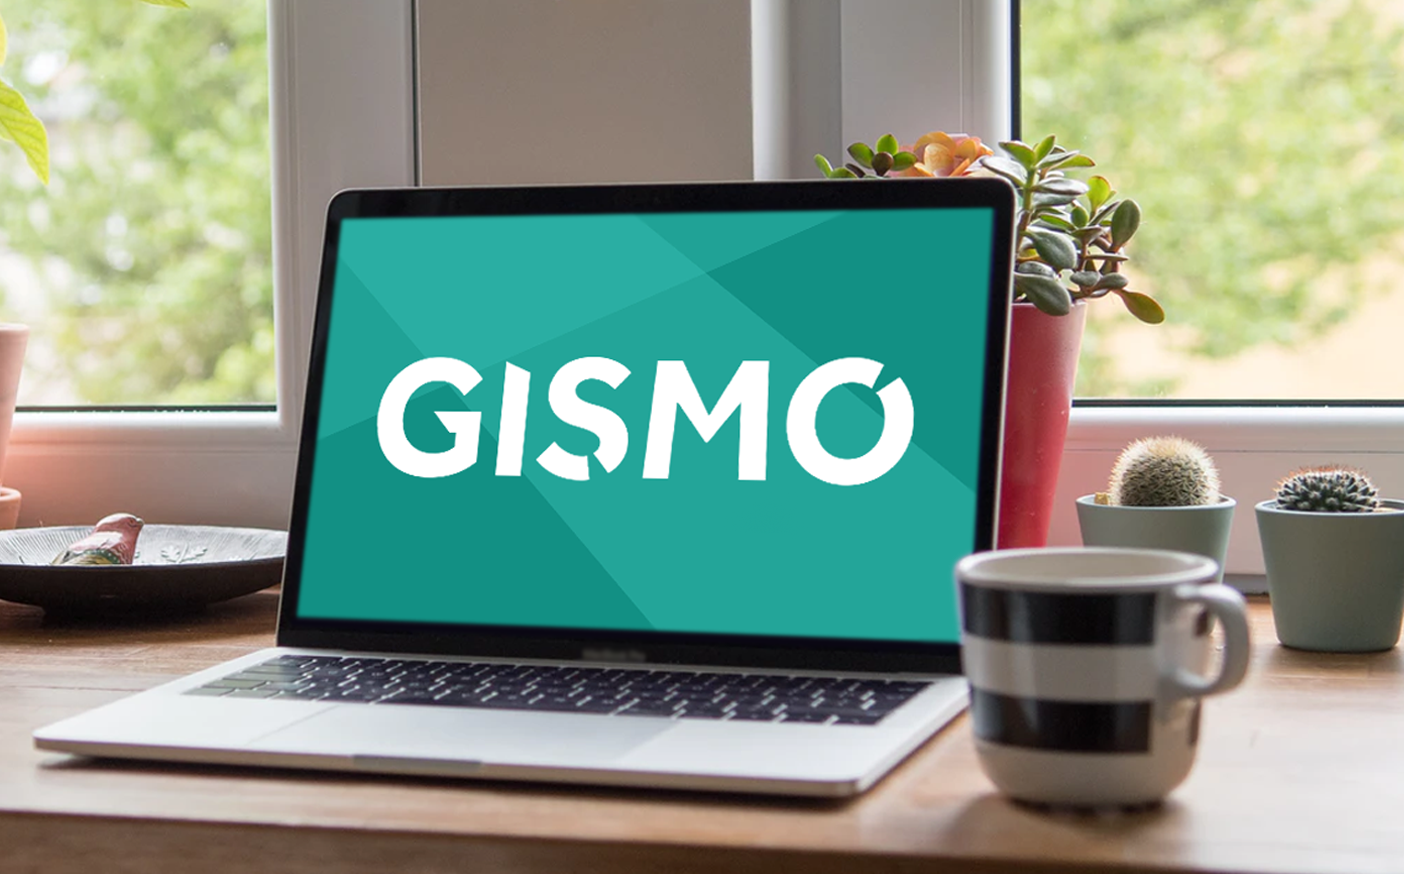 GISMO sees first successful launch event Greater Innovation for